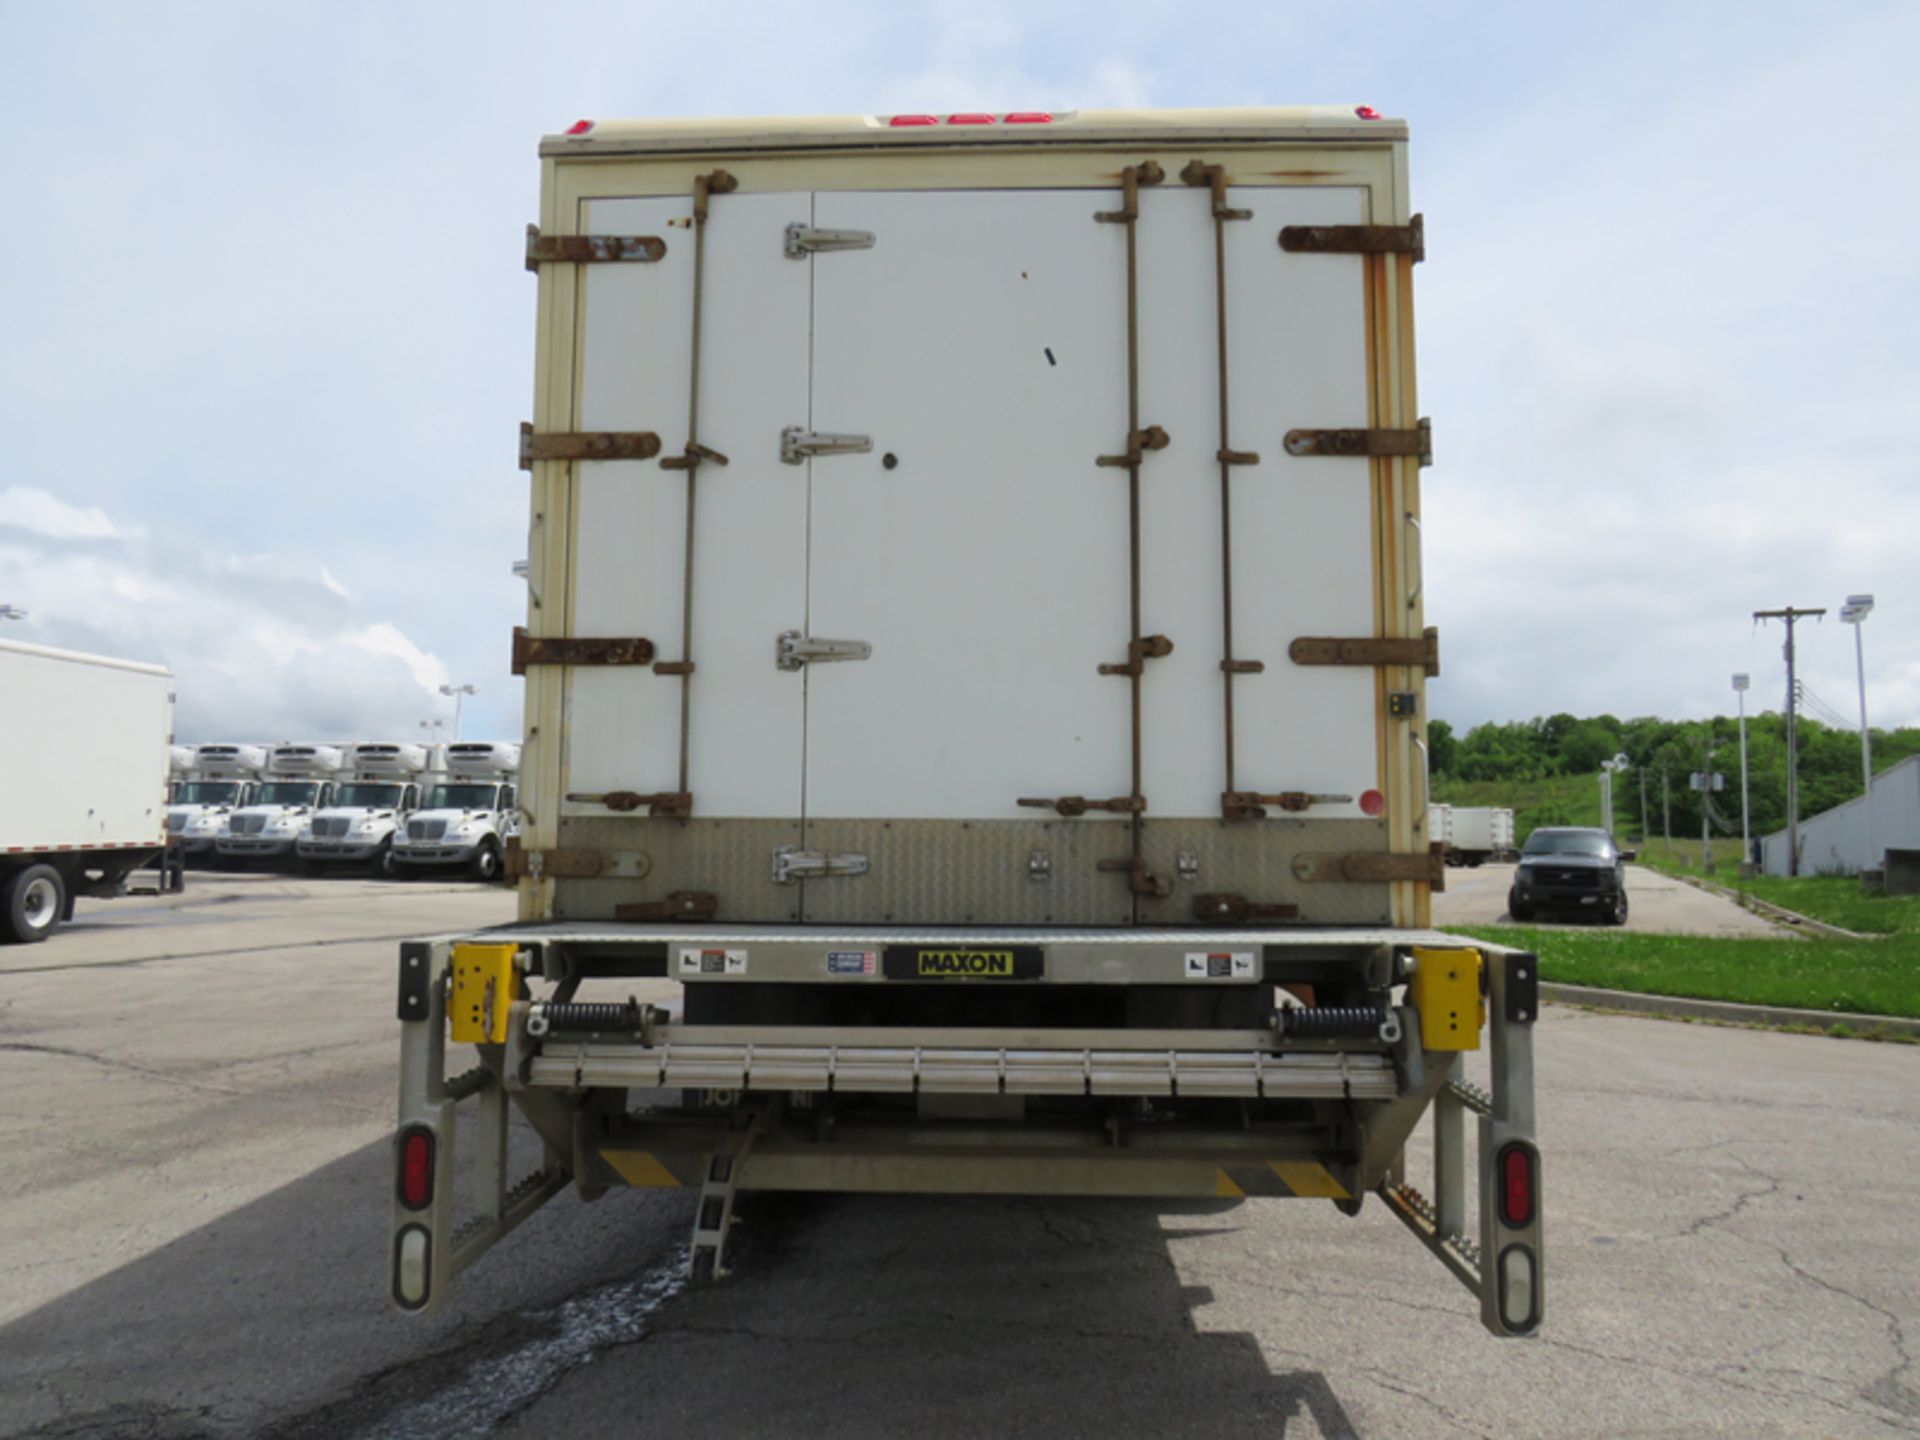 2018 INTERNATIONAL 4400 SBA 6X4 REFRIGERATED BOX TRUCK VIN#: 1HTMSTAR8JH529714, Approx Miles: 43606, - Image 4 of 9